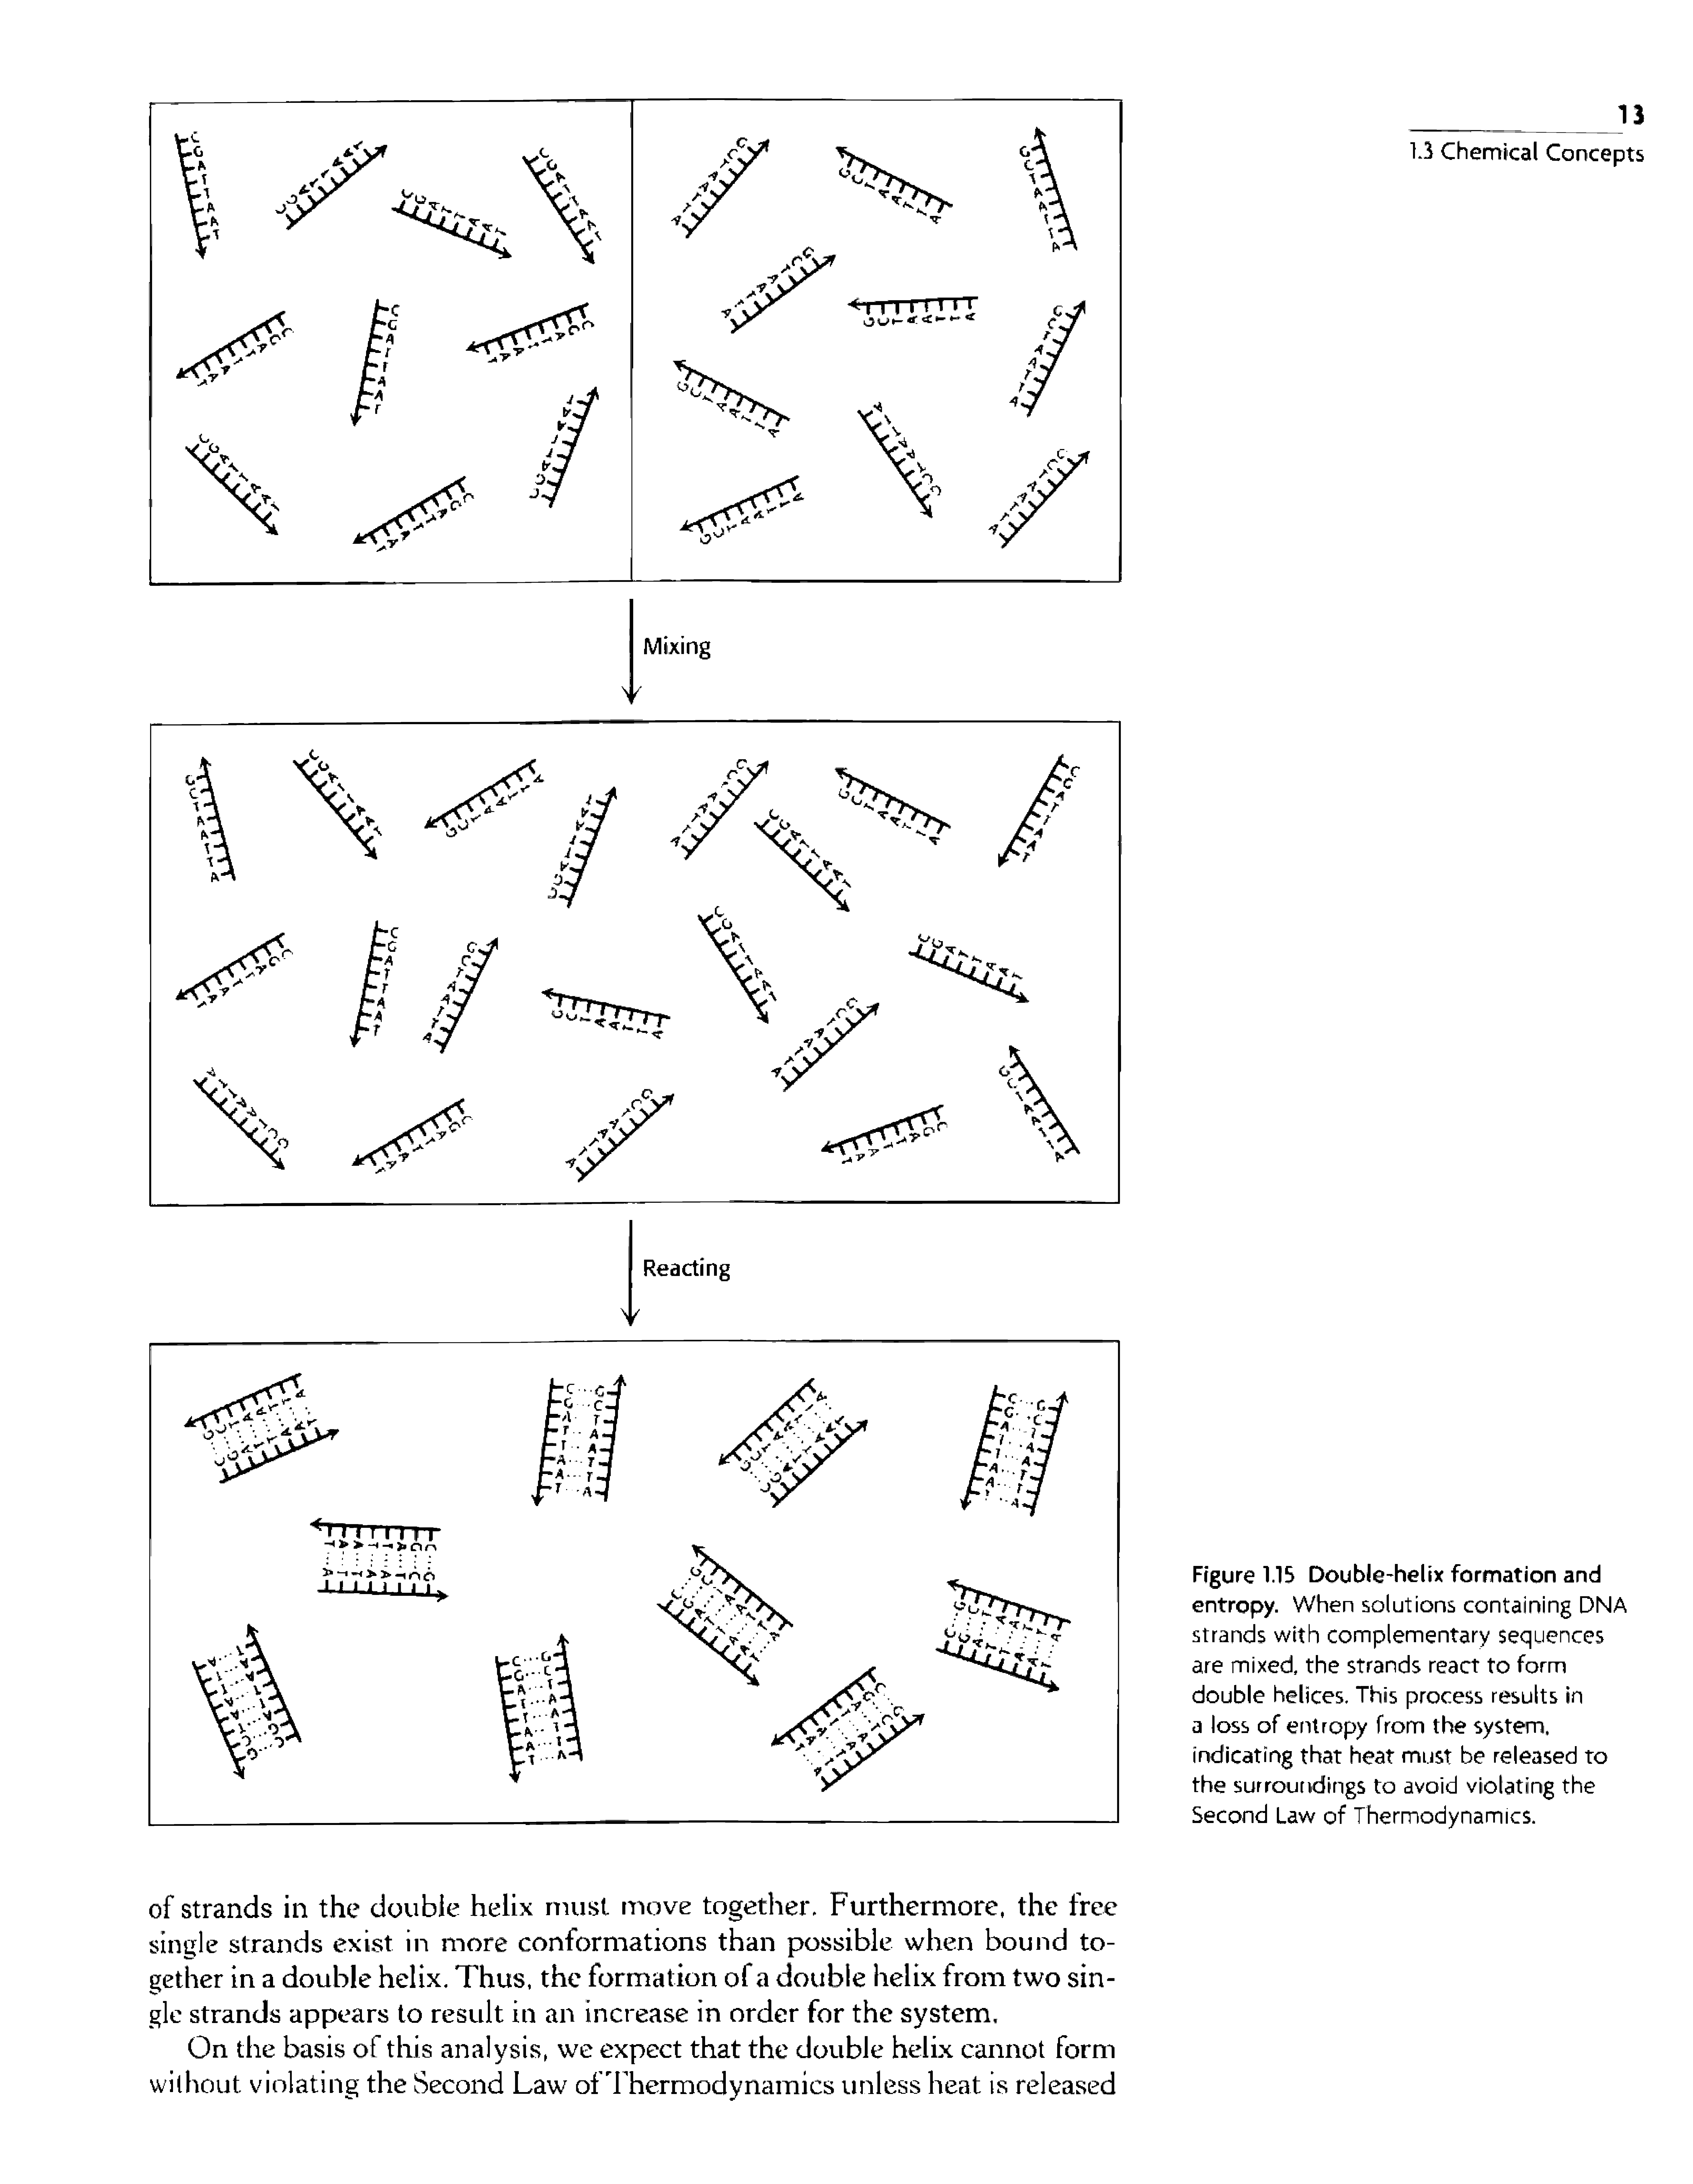 Figure 1.15 Double-helix formation and entropy. When solutions containing DNA strands with complementary sequences are mixed, the strands react to form double helices. This process results in a loss of entropy from the system, indicating that heat must be released to the surroutrdings to avoid violating the Second Law of Thermodynamics.